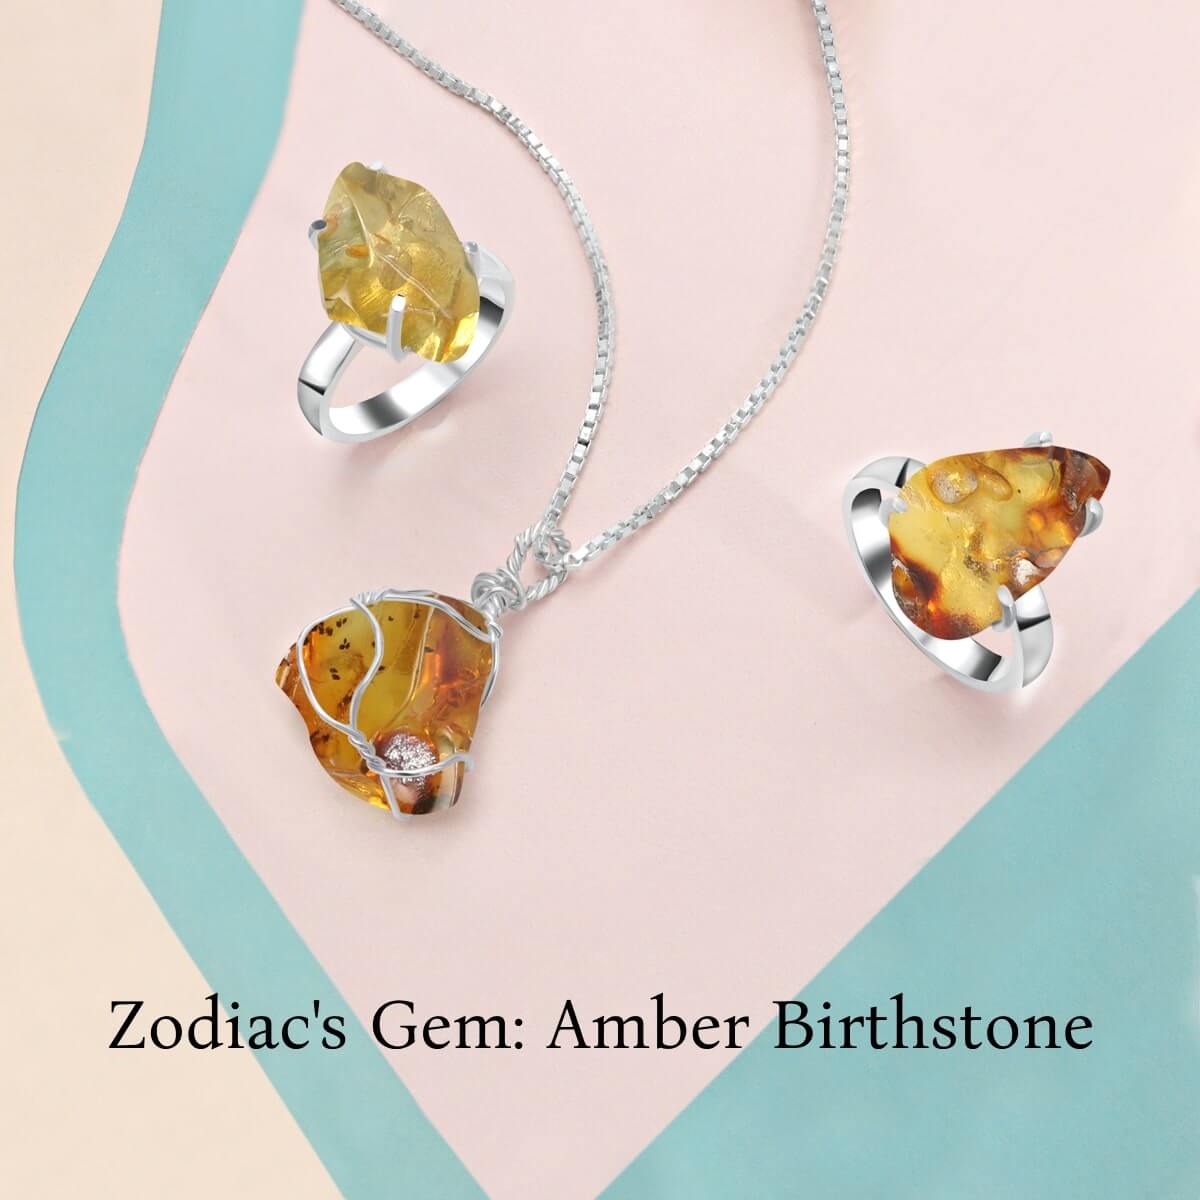 Amber is The Birthstone Jewelry of Which Zodiac Sign